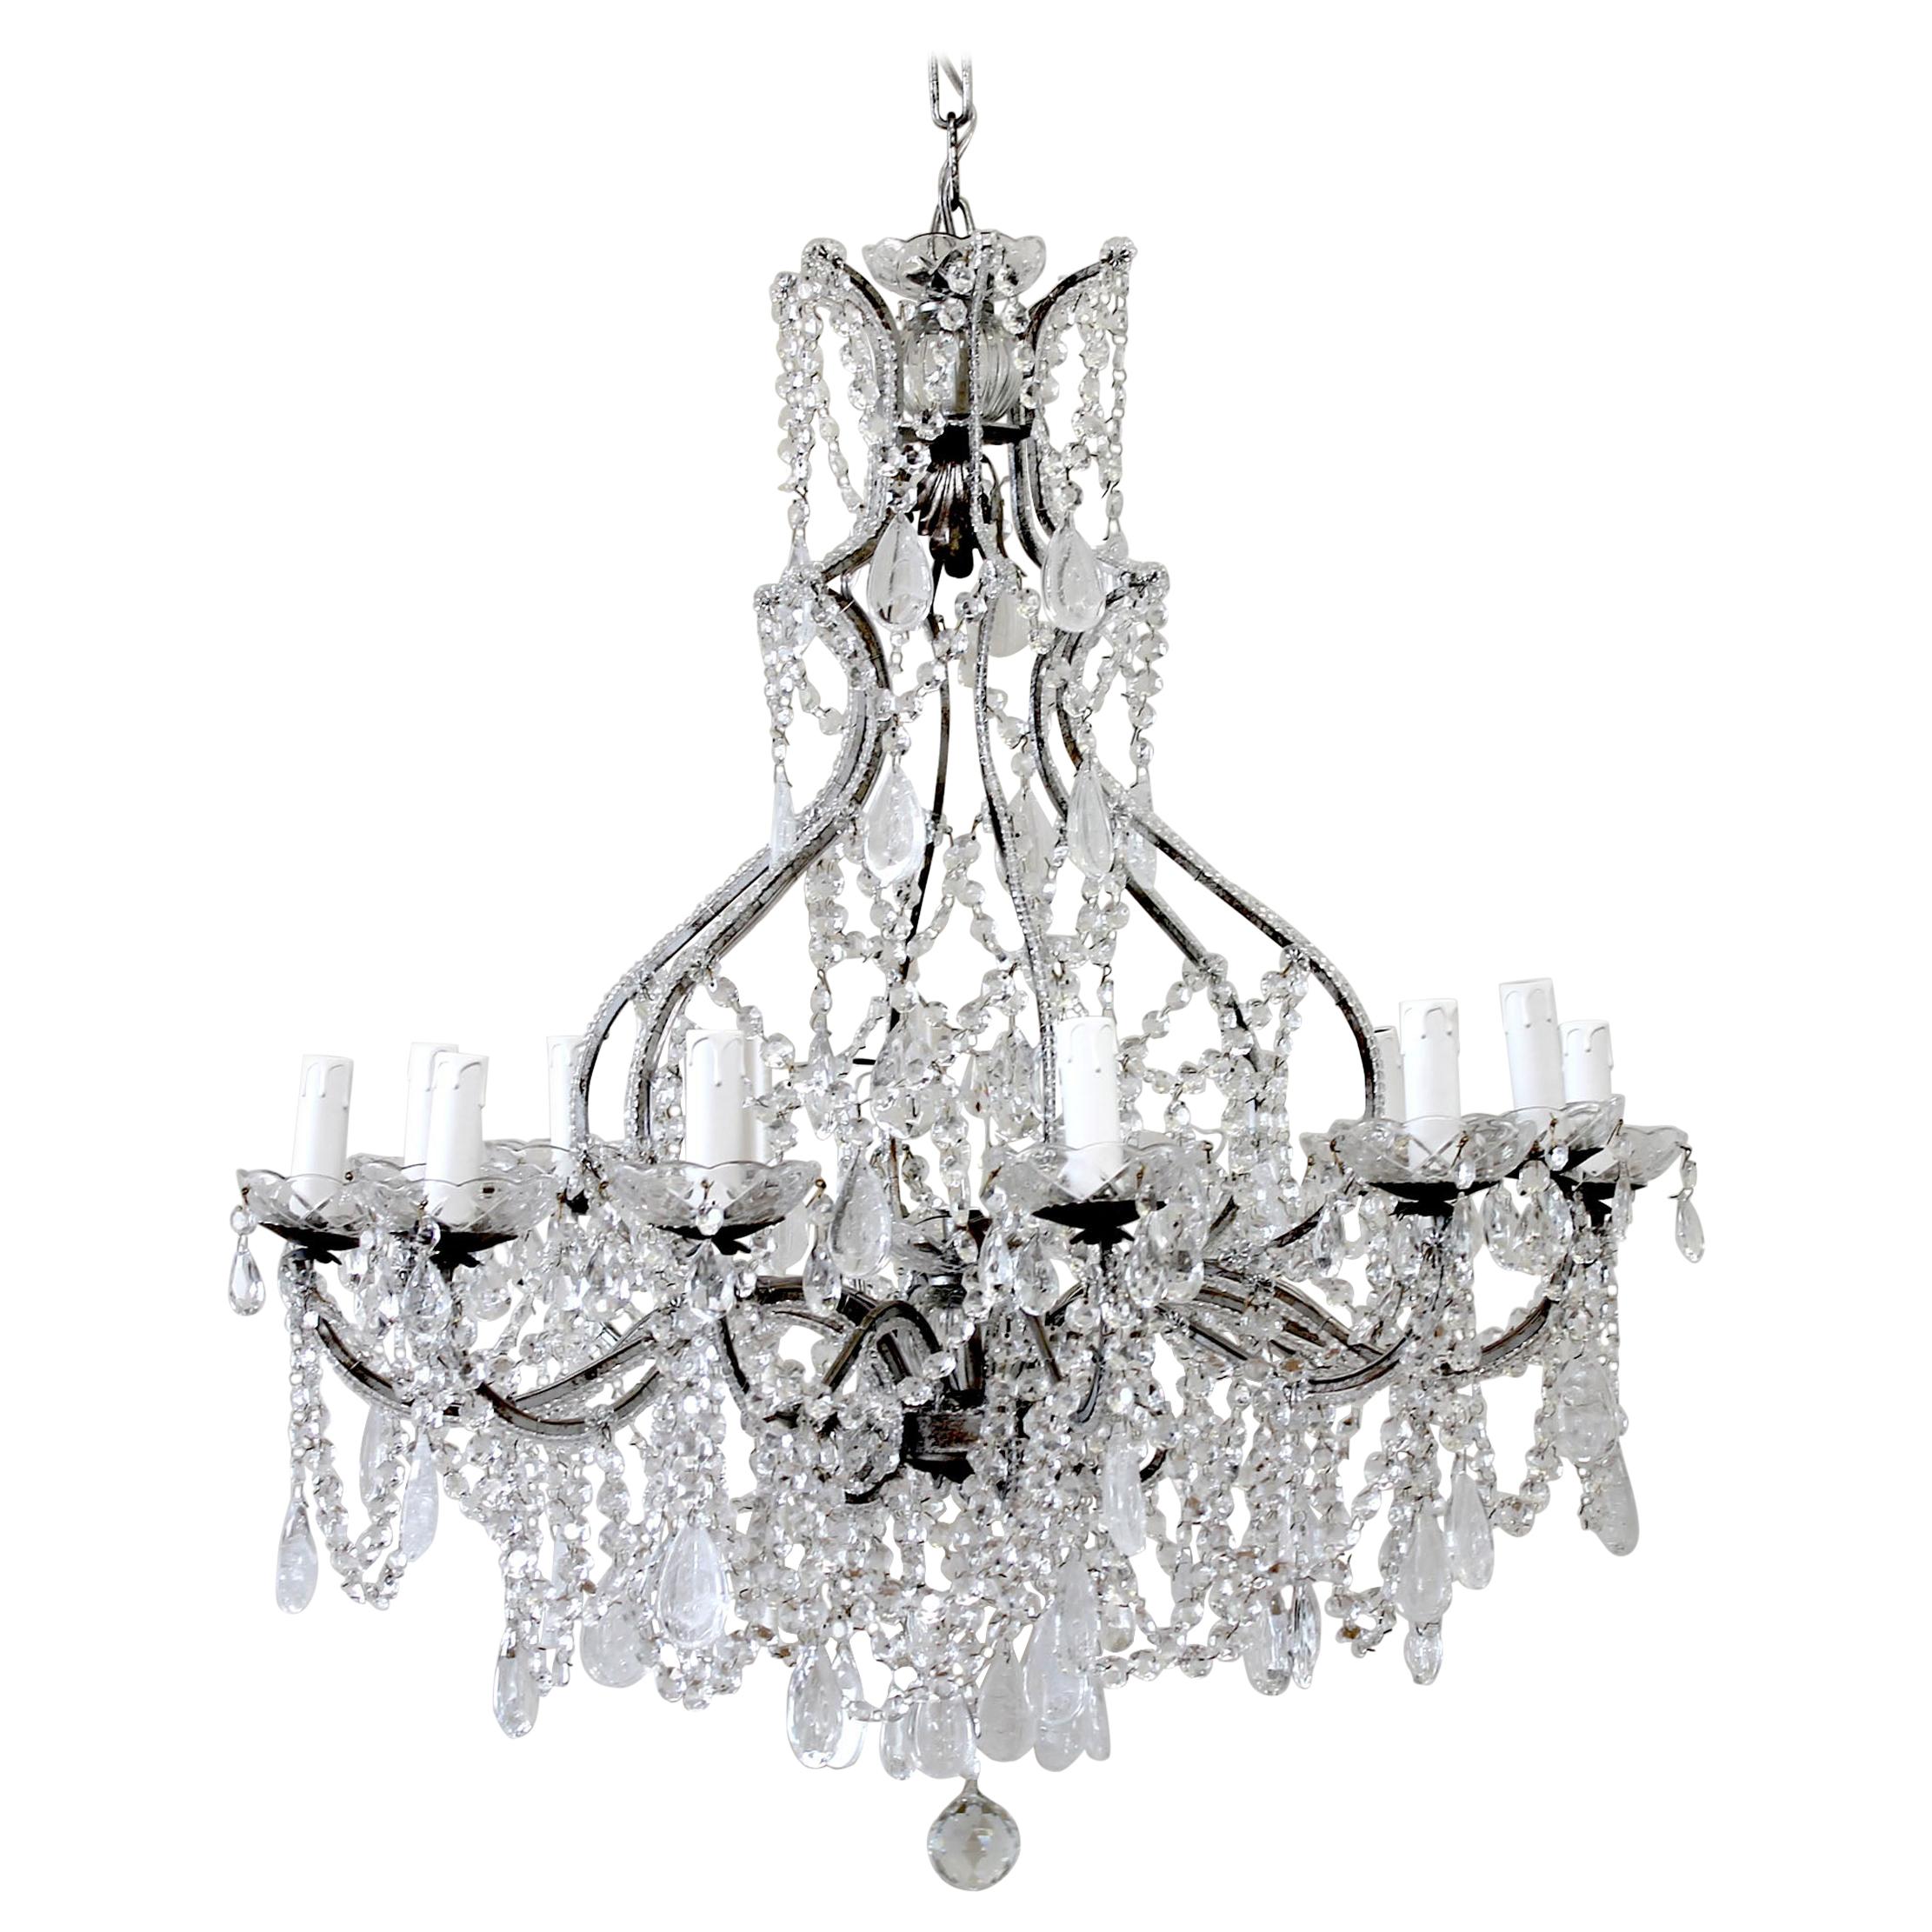 Antique Reproduction Italian Chandelier with Beaded Arms and Rock Style Crystals For Sale